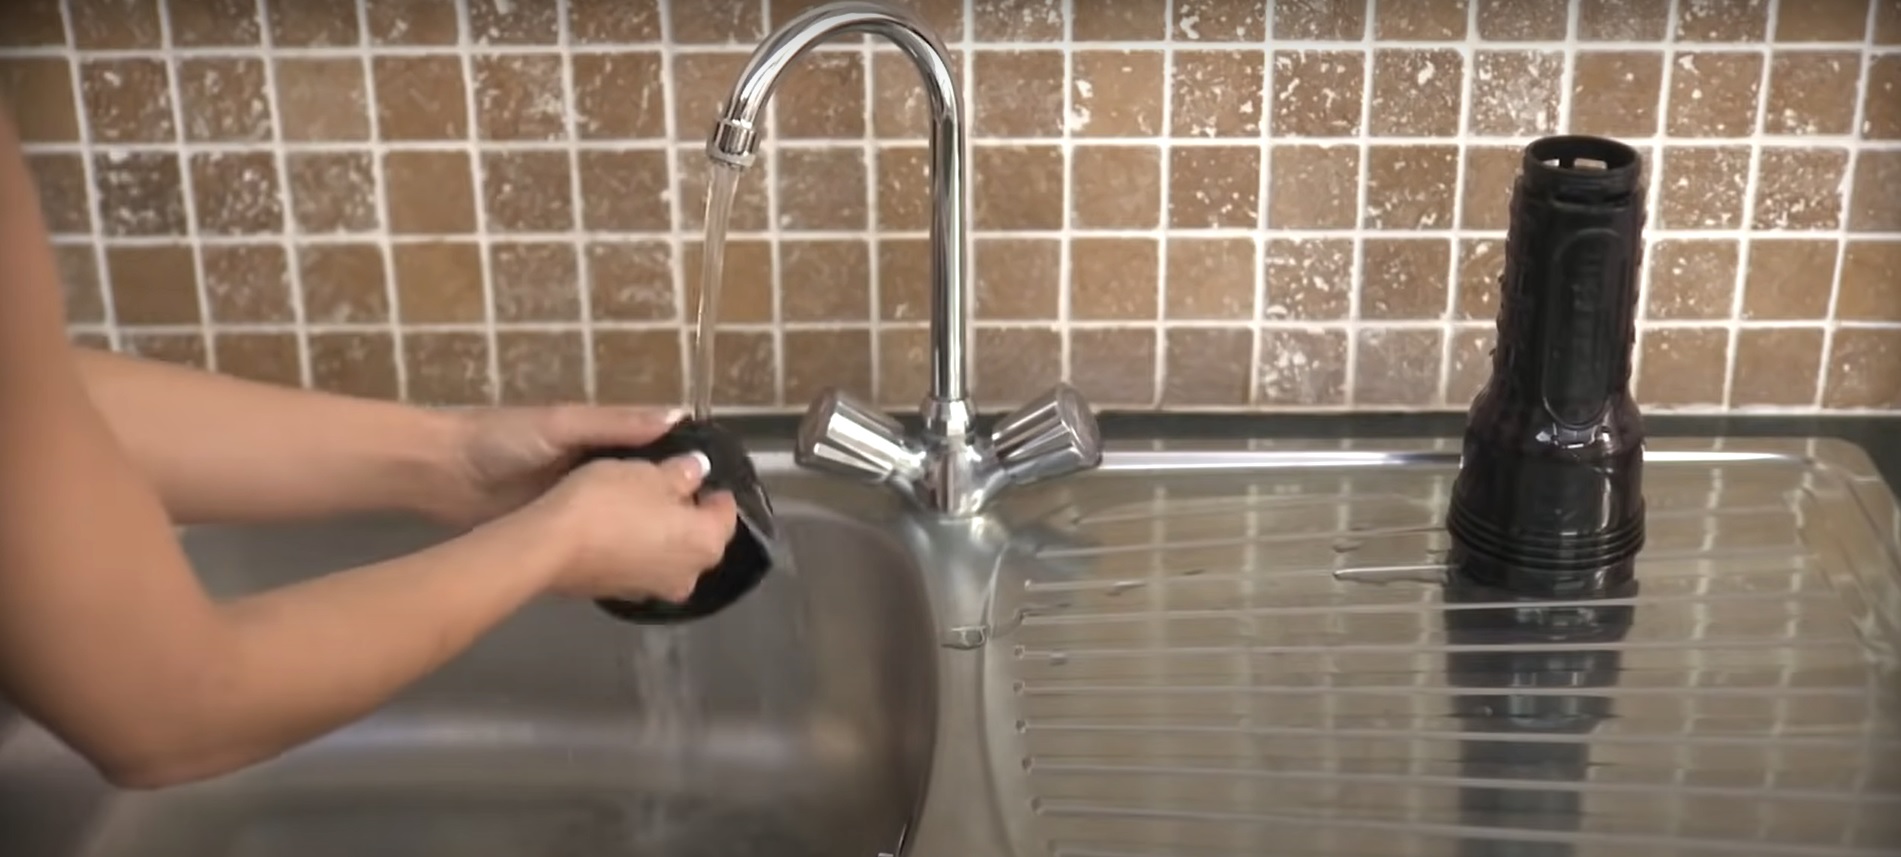 1. rinse case under tap with soap